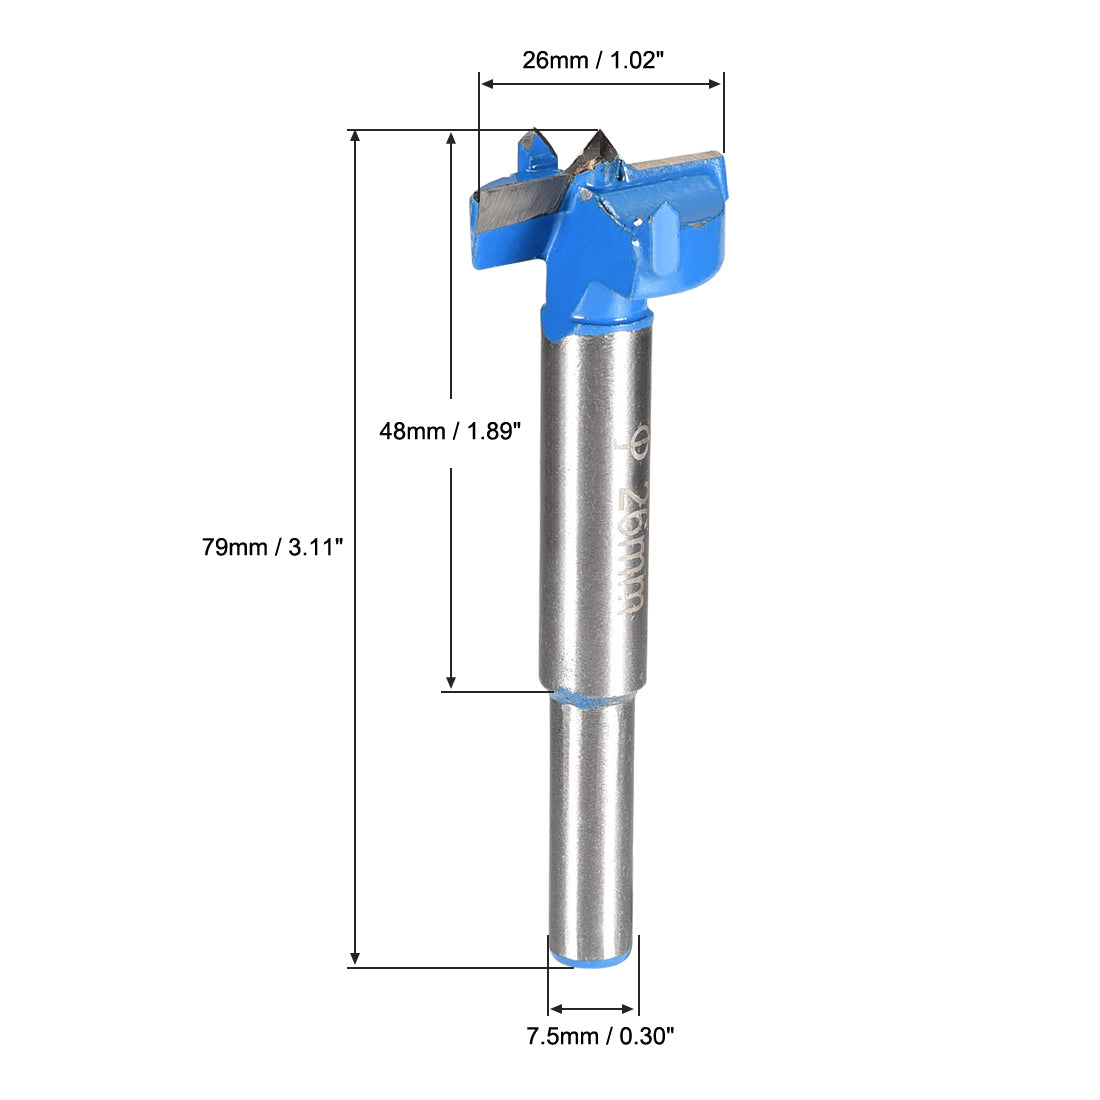 uxcell Uxcell Forstner Wood Boring Drill Bit 26mm Dia. Hole Saw Carbide Alloy Tip Steel Round Shank Cutting for Woodworking Blue 2Pcs